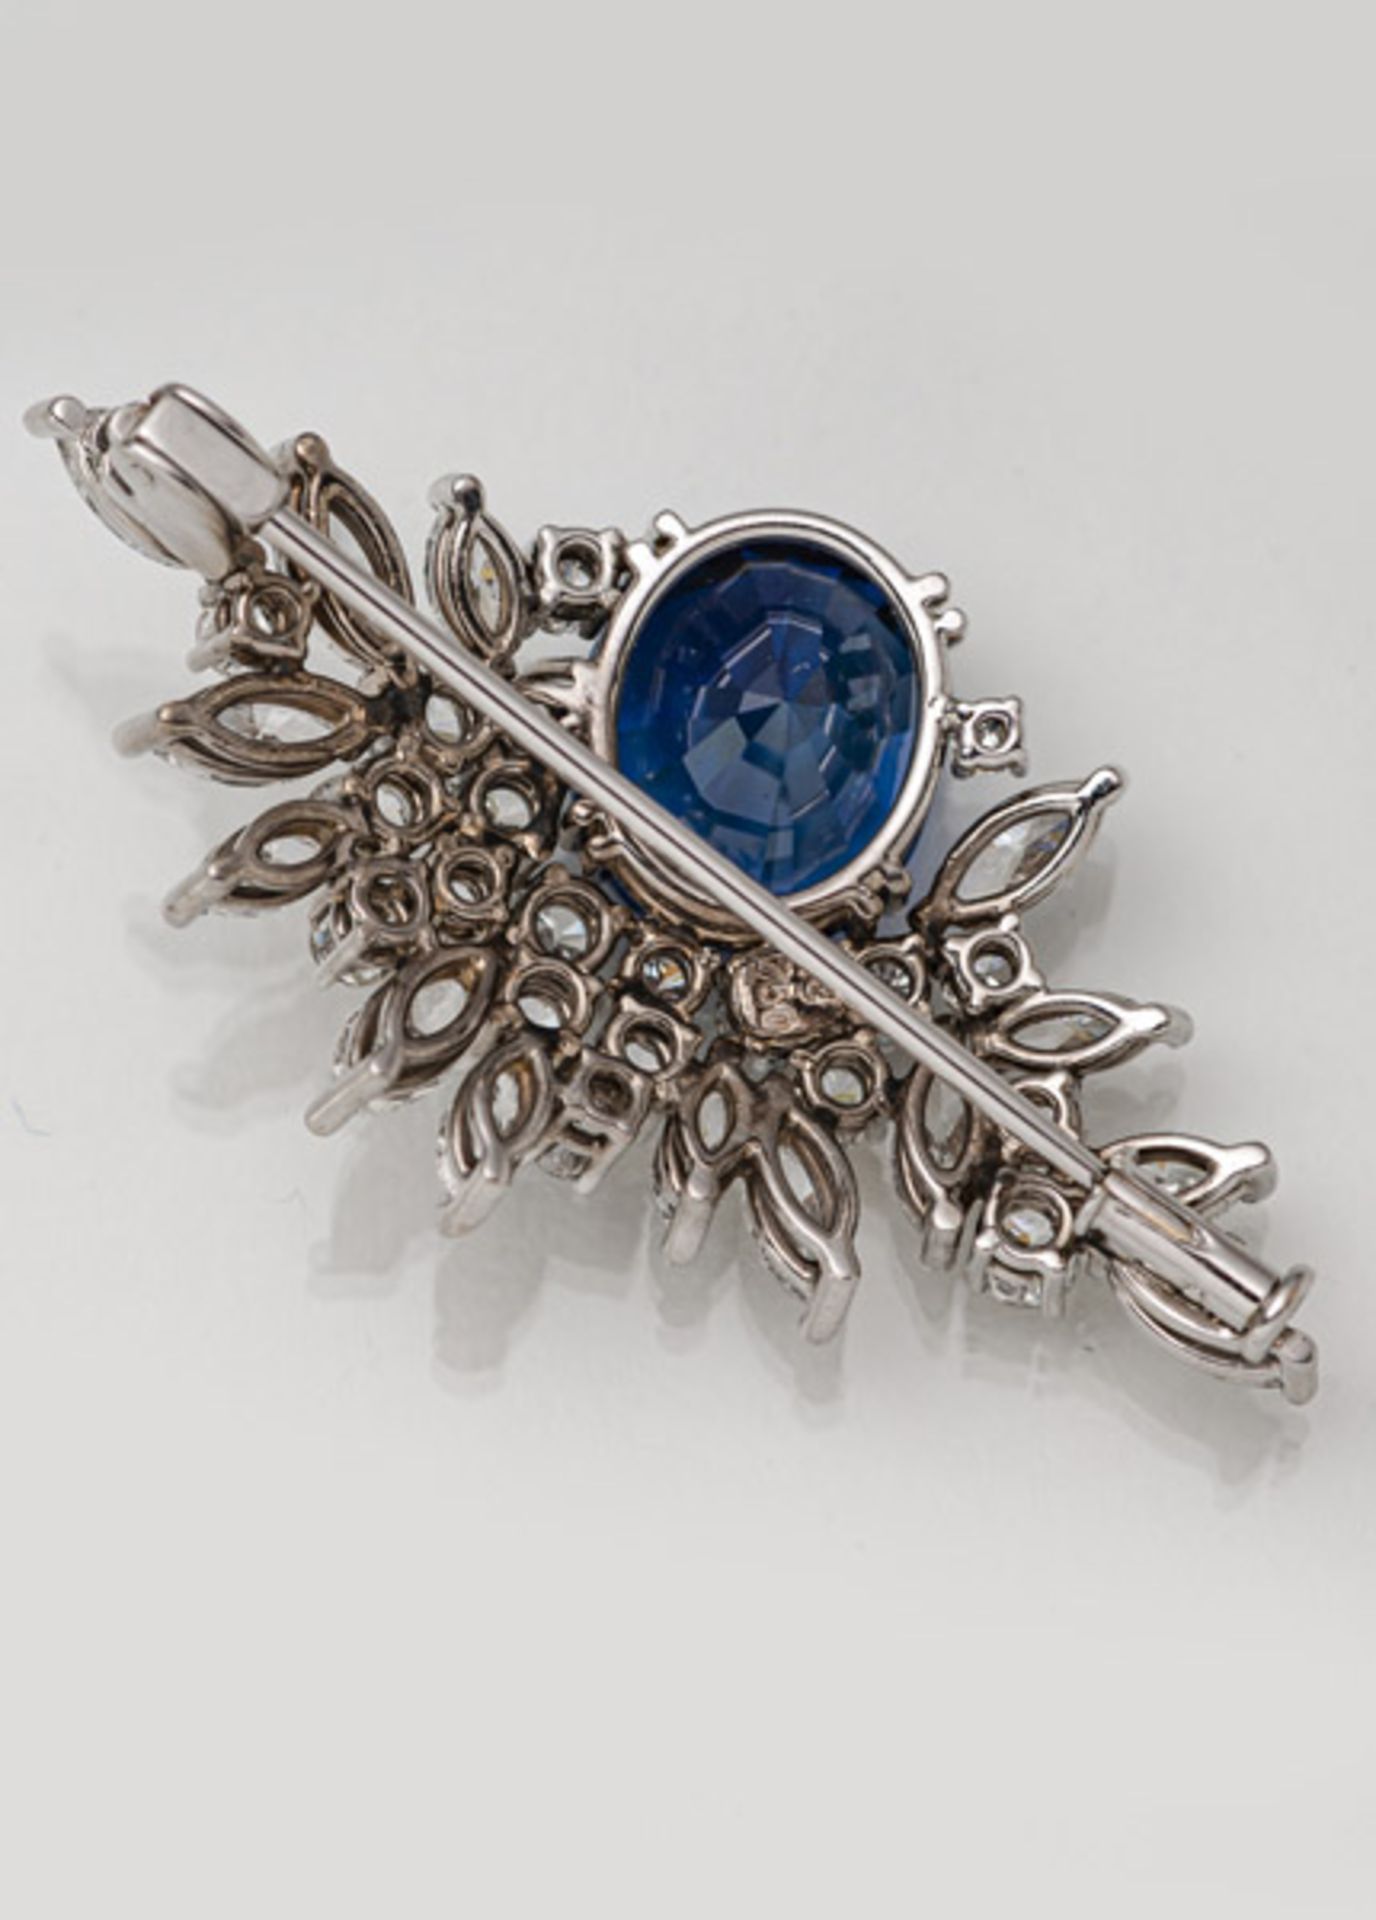 A FINE SAPPHIRE AND DIAMOND BROOCH - Image 3 of 3